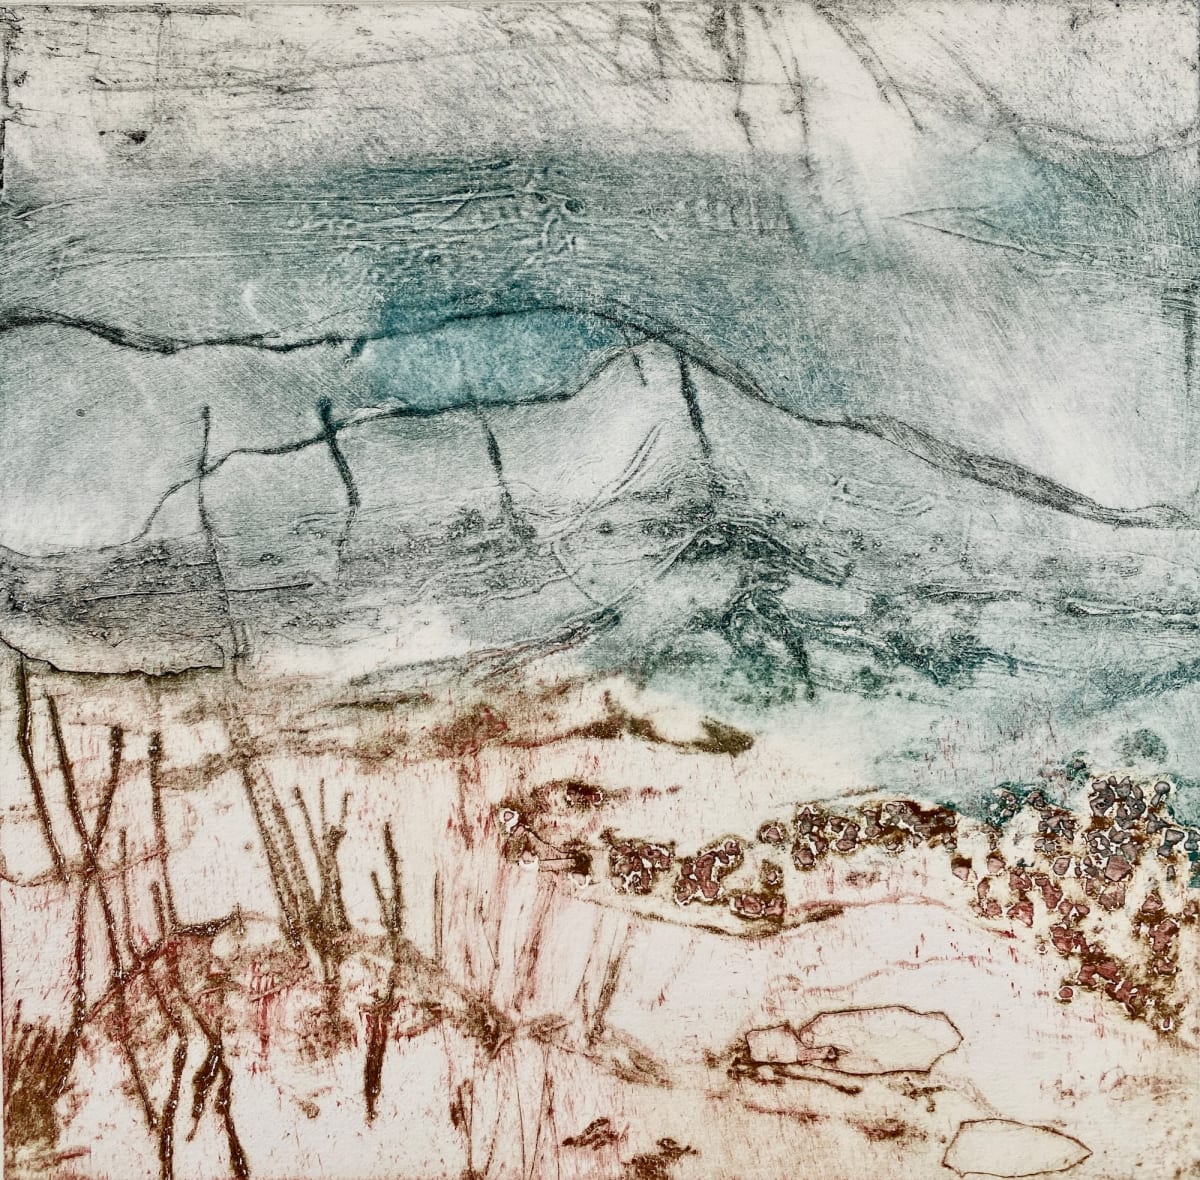 Solitary Peace  OEV5 by Victoria Johns Art  Image: Collagraph Original Hand Pulled Print (Open Edition Varied).  Abstract Landscape. Framed in Wood.